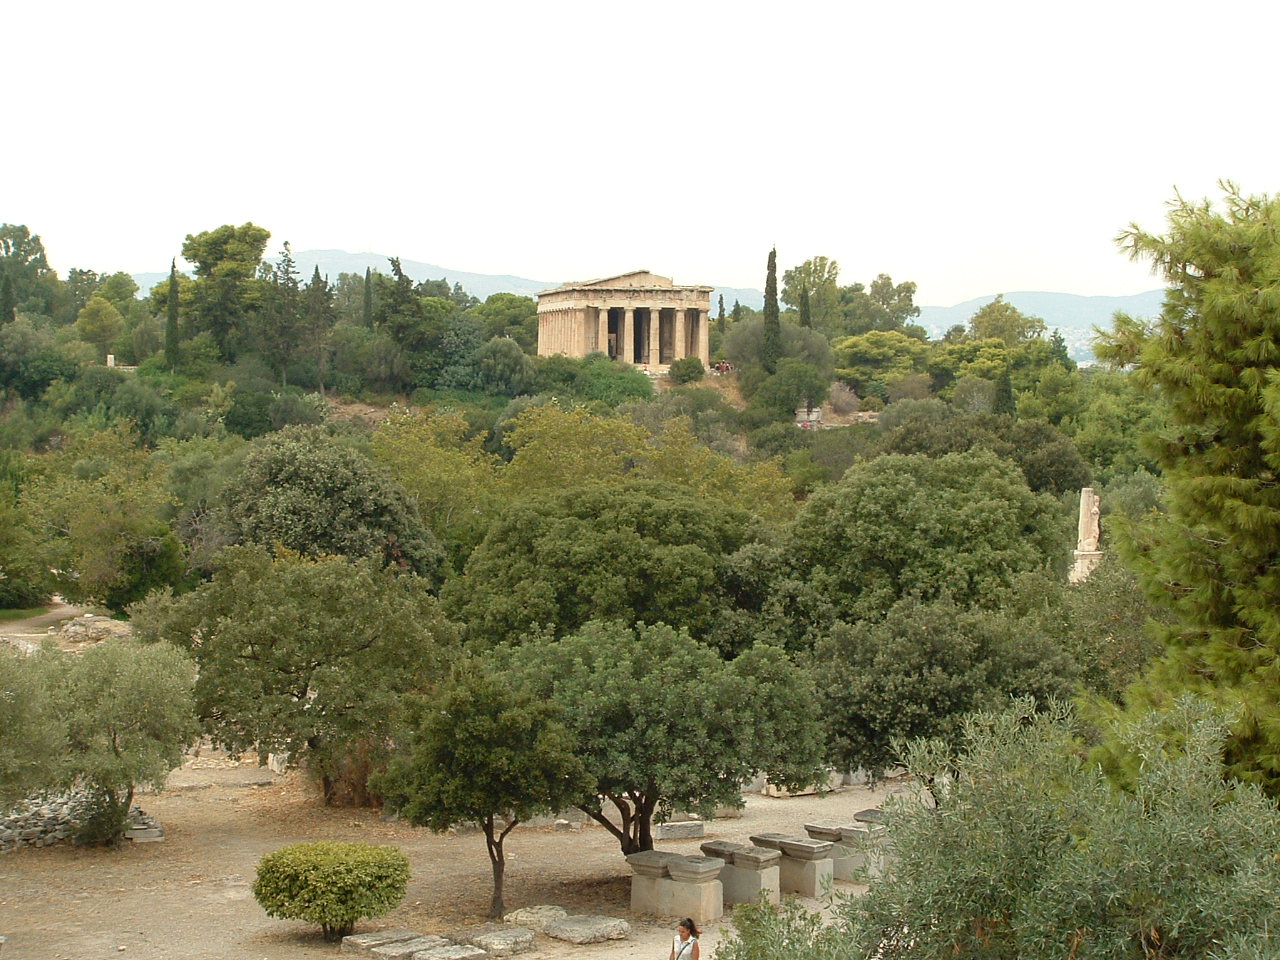 The temple with the Agora below